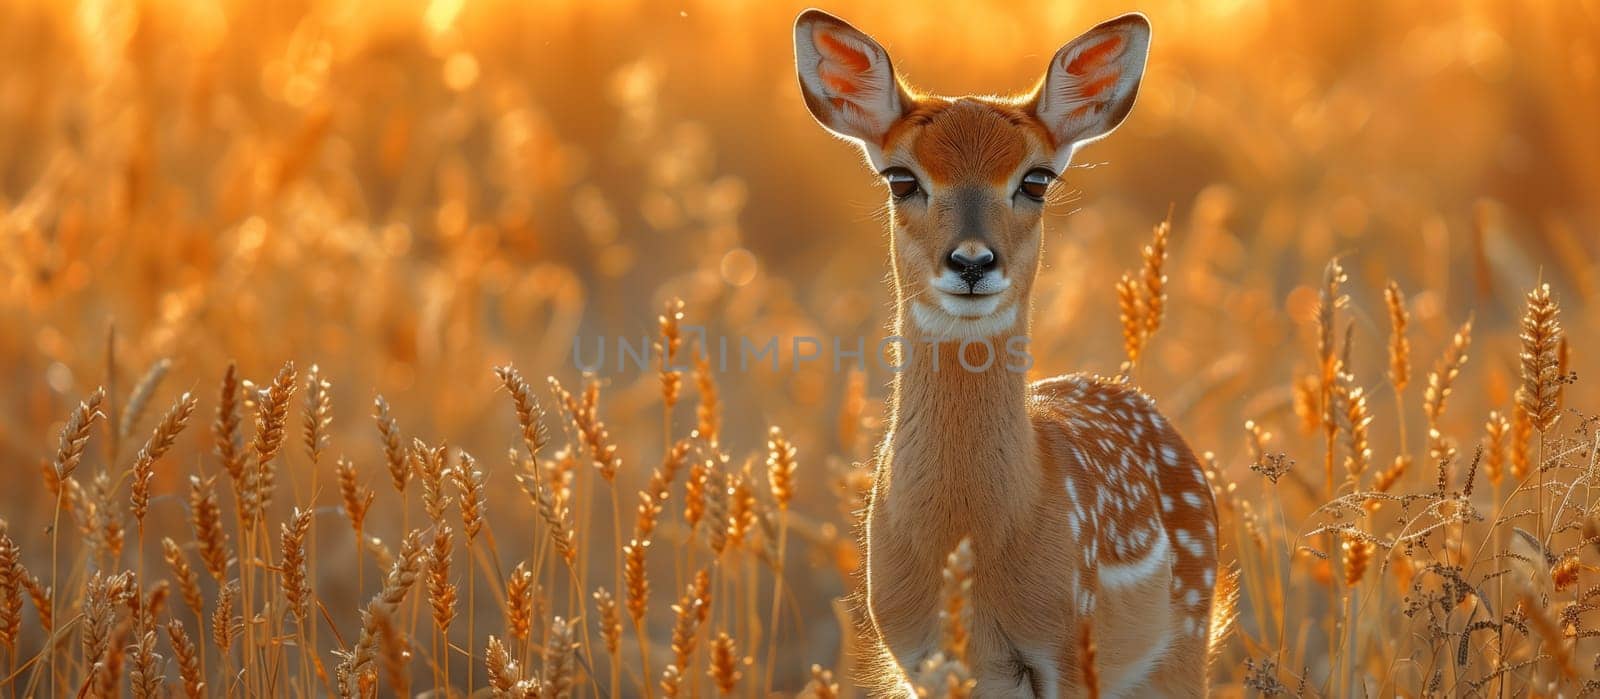 A Whitetailed deer stands in a grassy field, gazing at the camera with its fawn. The natural landscape provides a serene backdrop for these terrestrial animals in the grassland